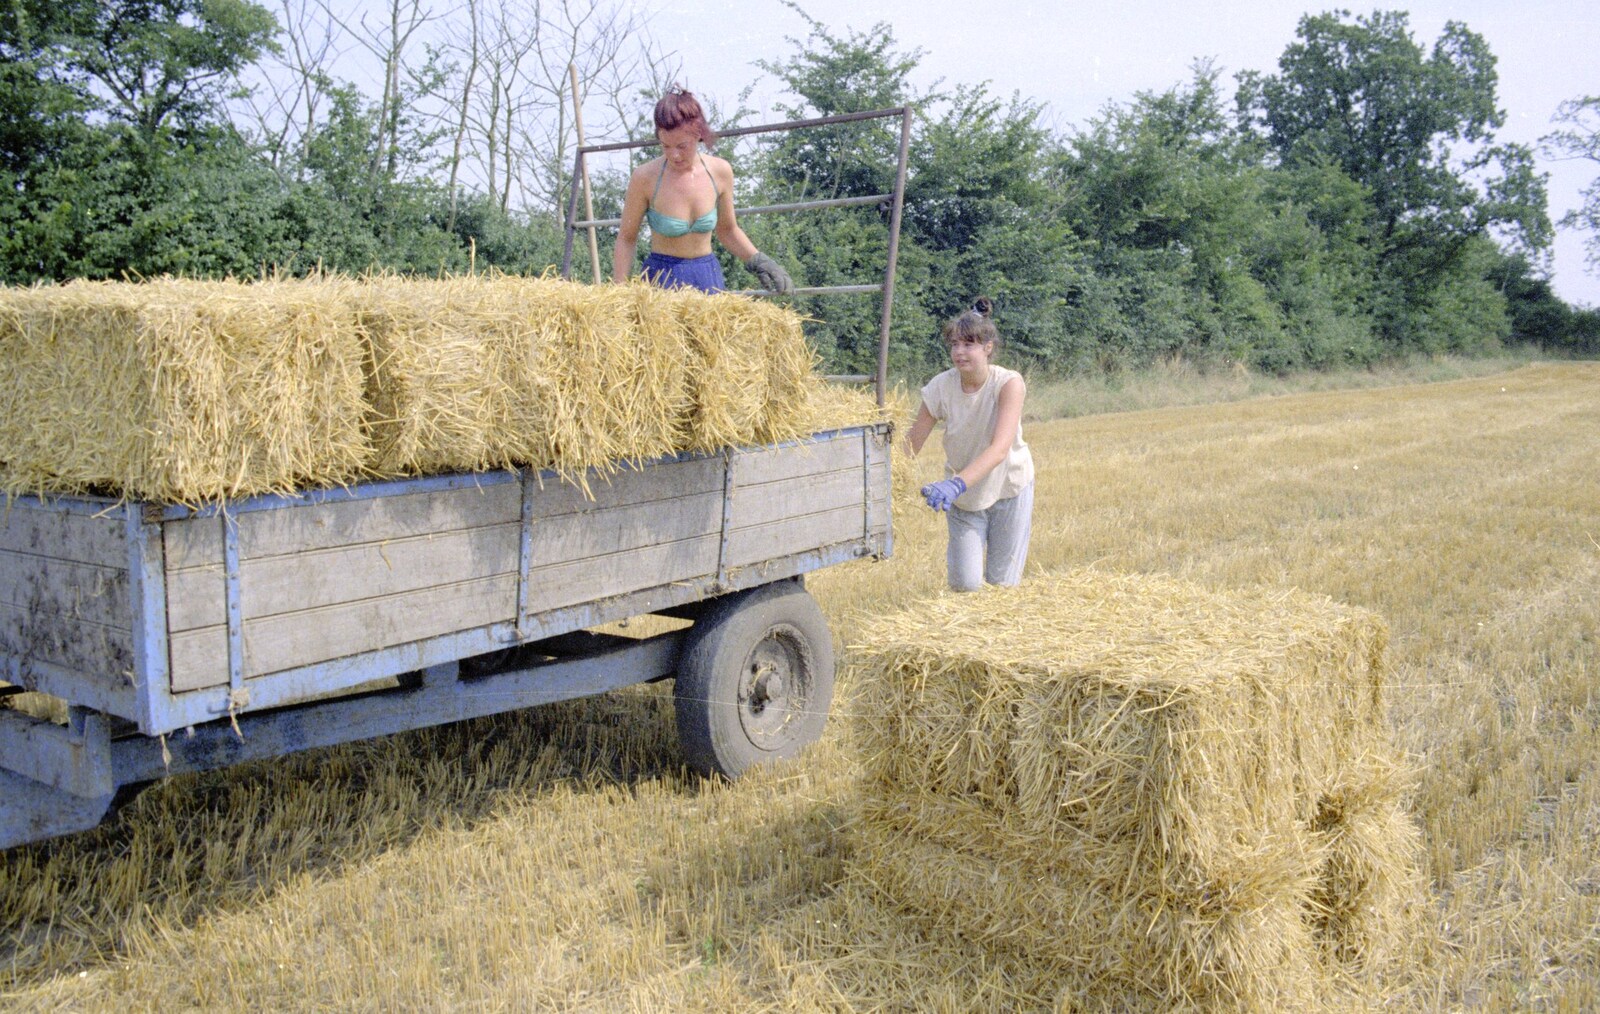 Working on the Harvest, Tibenham, Norfolk - 11th August 1992: Bale collecting